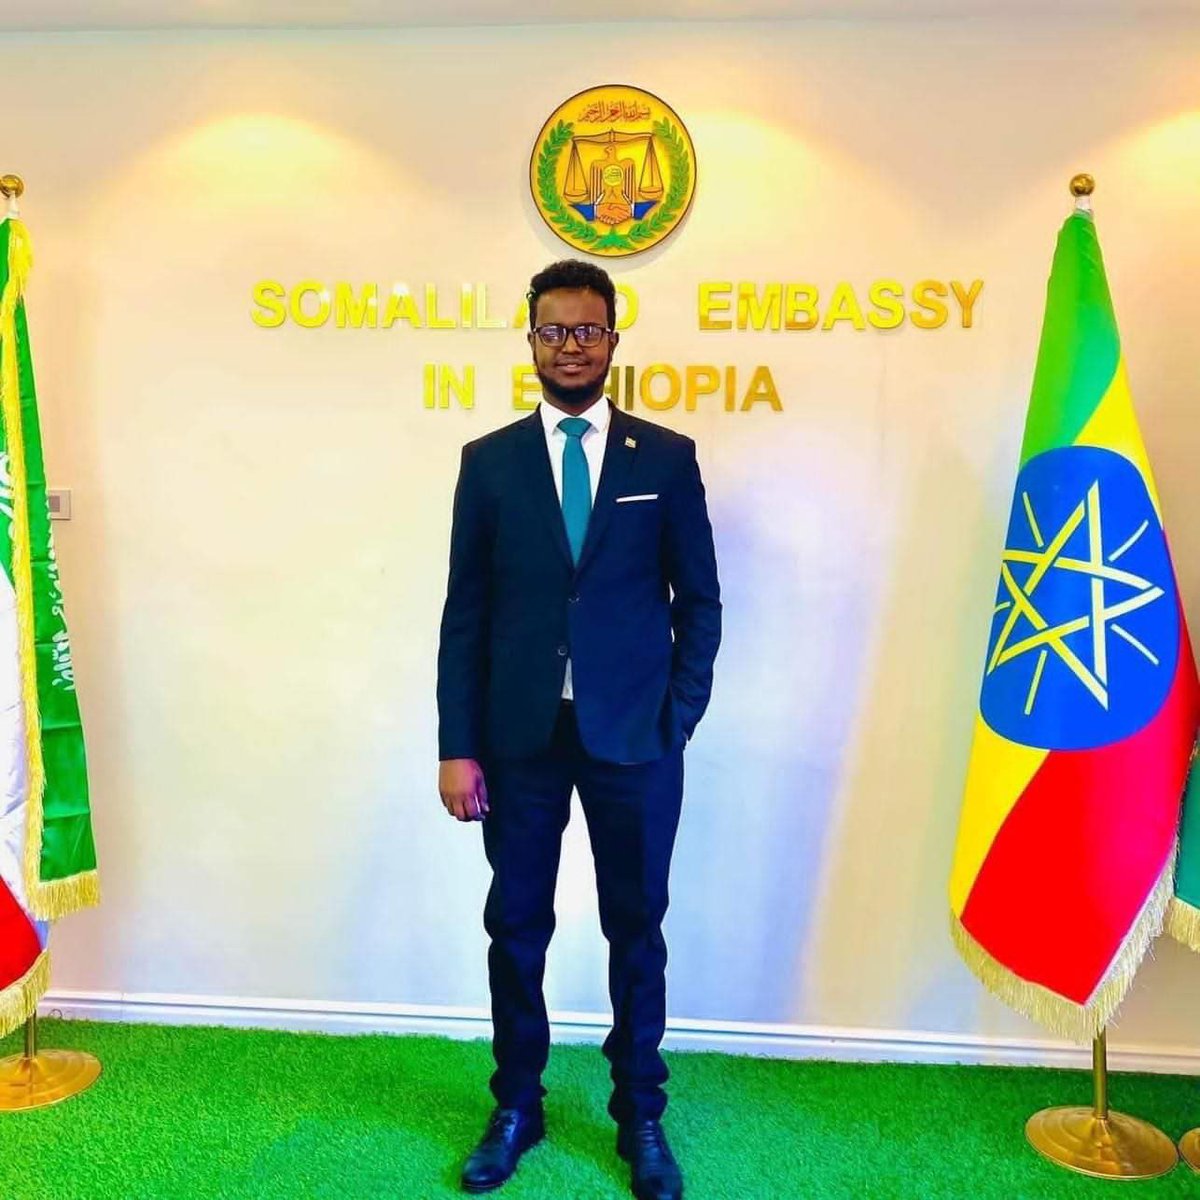 Celebrating the journey!  Dear Somaliland citizens, from humble beginnings, you now have a full-fledged diplomatic mission in Ethiopia, effective immediately. 
 #DiplomacySuccess #Somaliland #setsomalilandfree